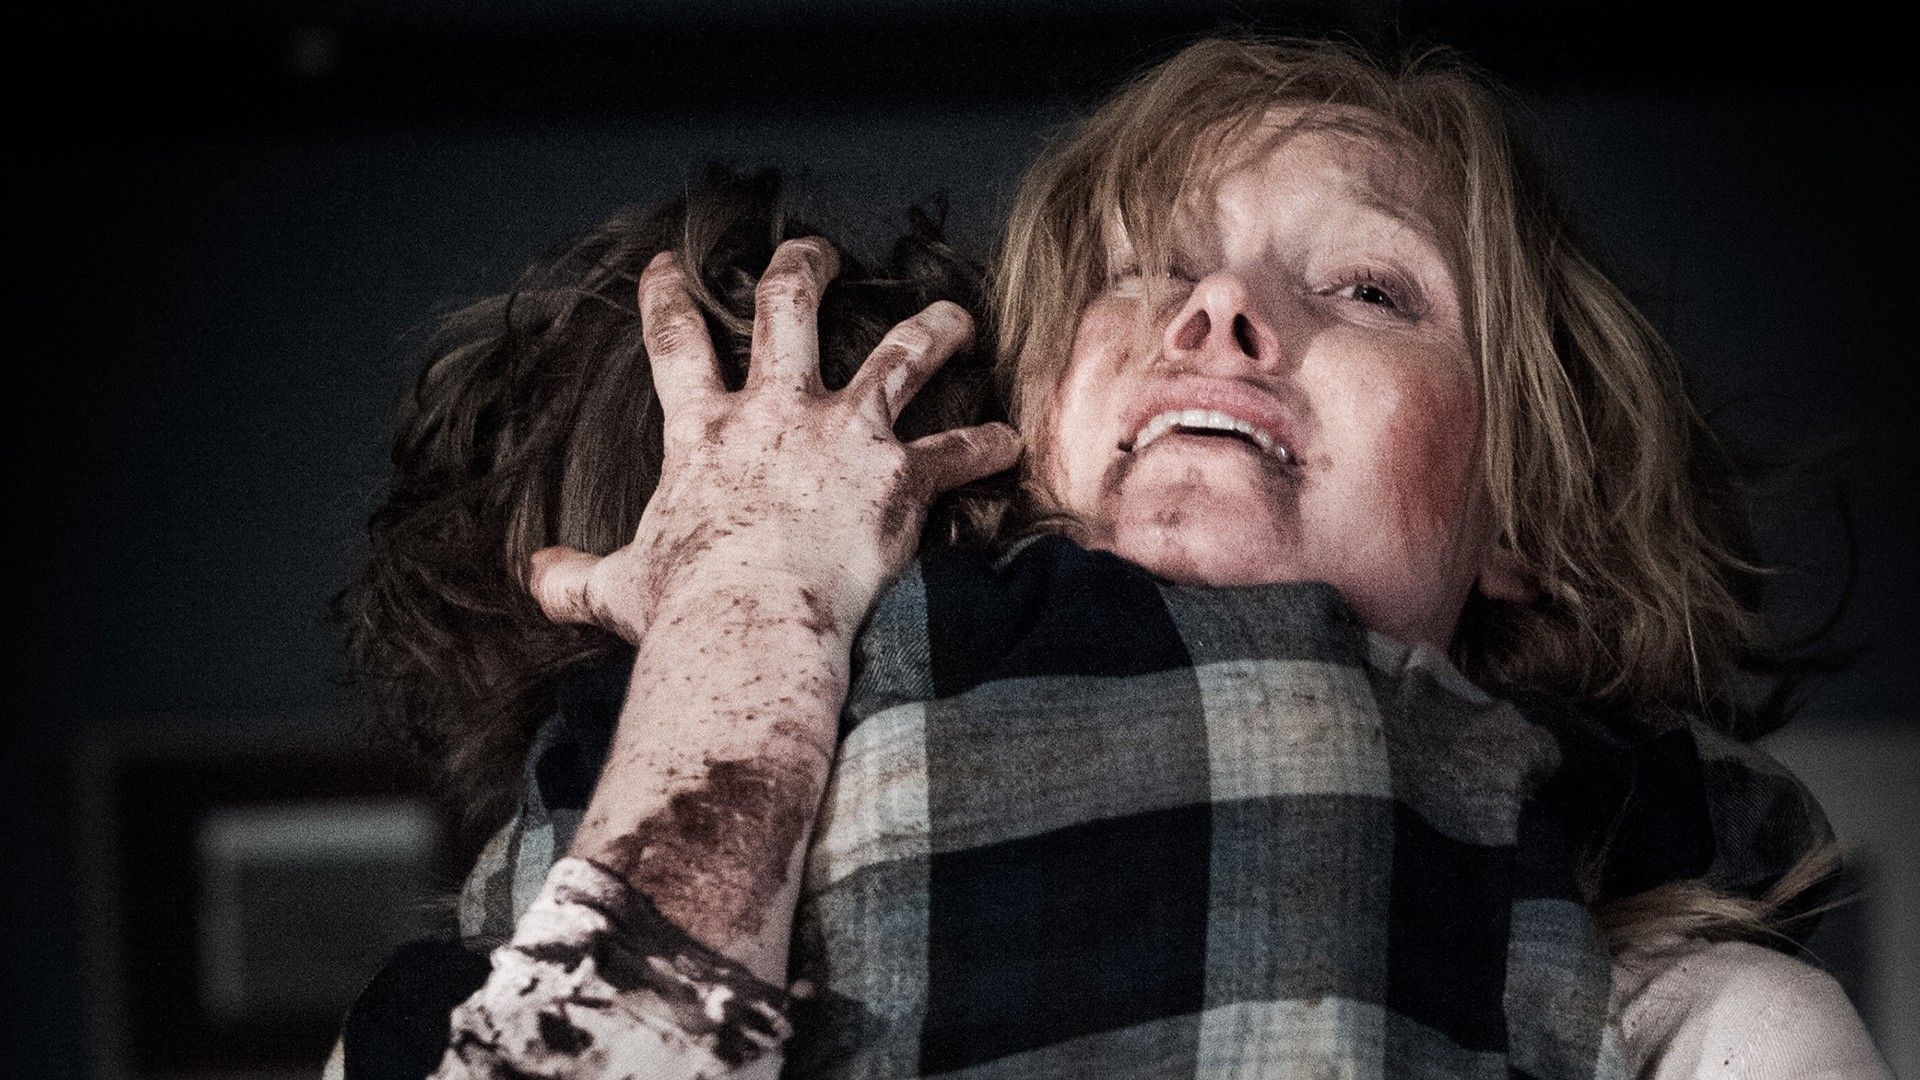 Through a Mother's Eyes: The Babadook and Examining Trauma Women